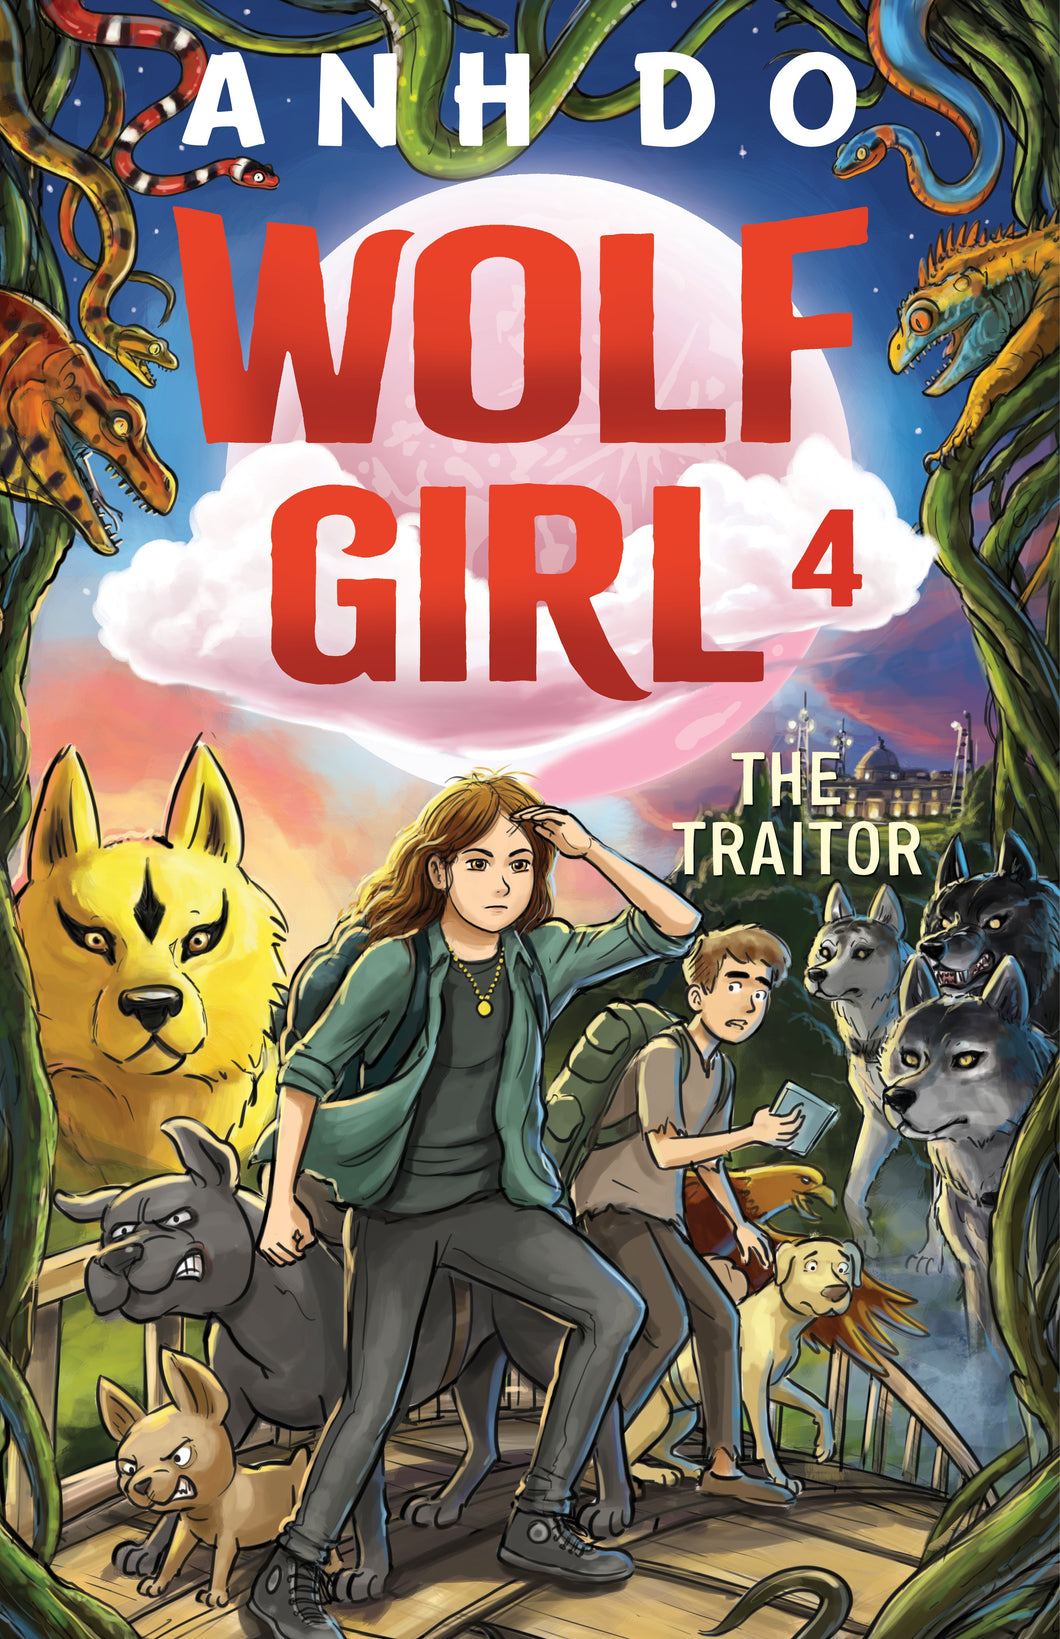 Wolf Girl 4 The Traitor by Anh Do